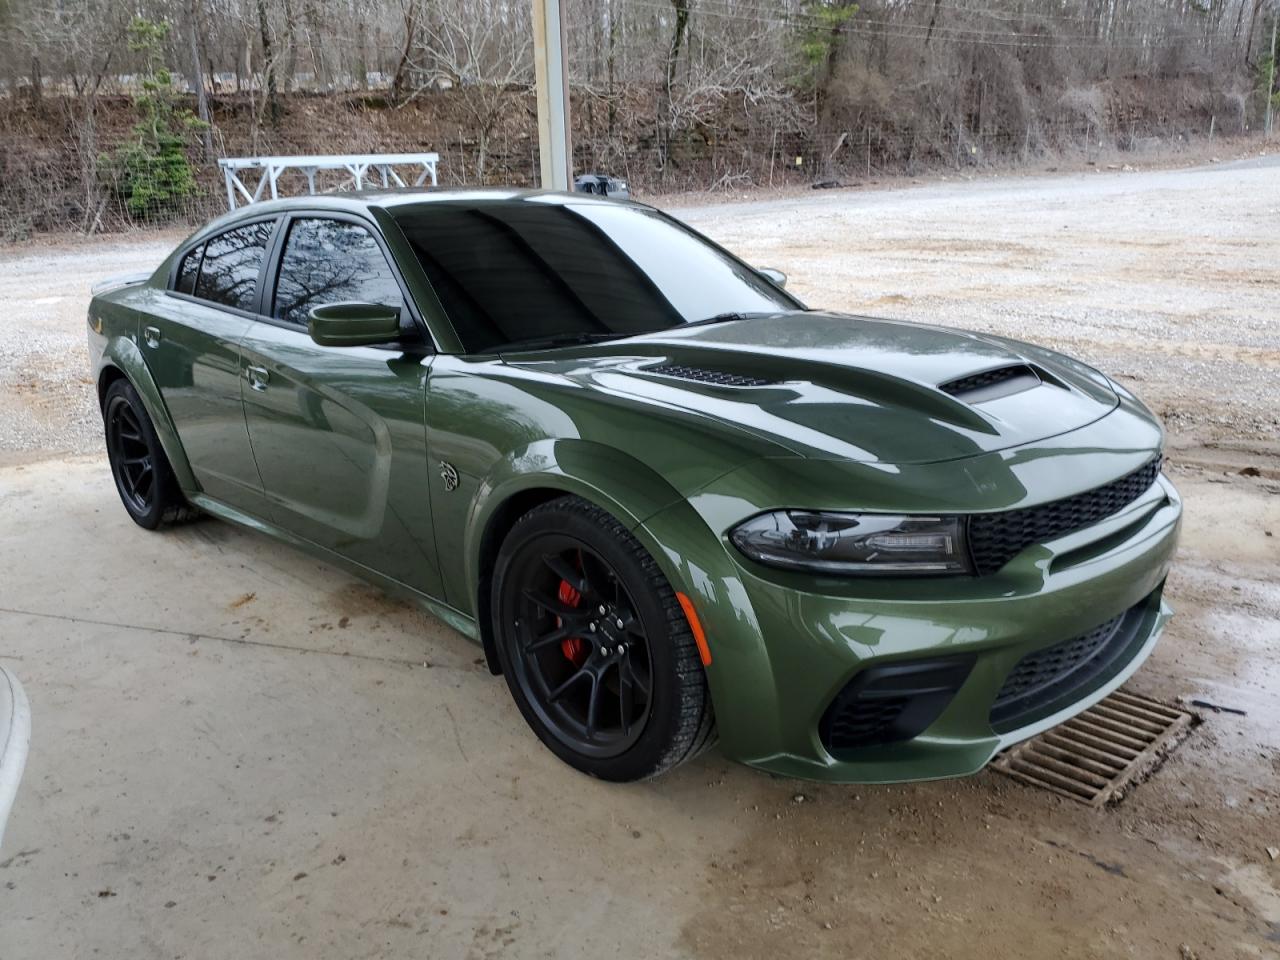 AL21AN00100****** Salvage and Wrecked 2021 Dodge Charger in Alabama State